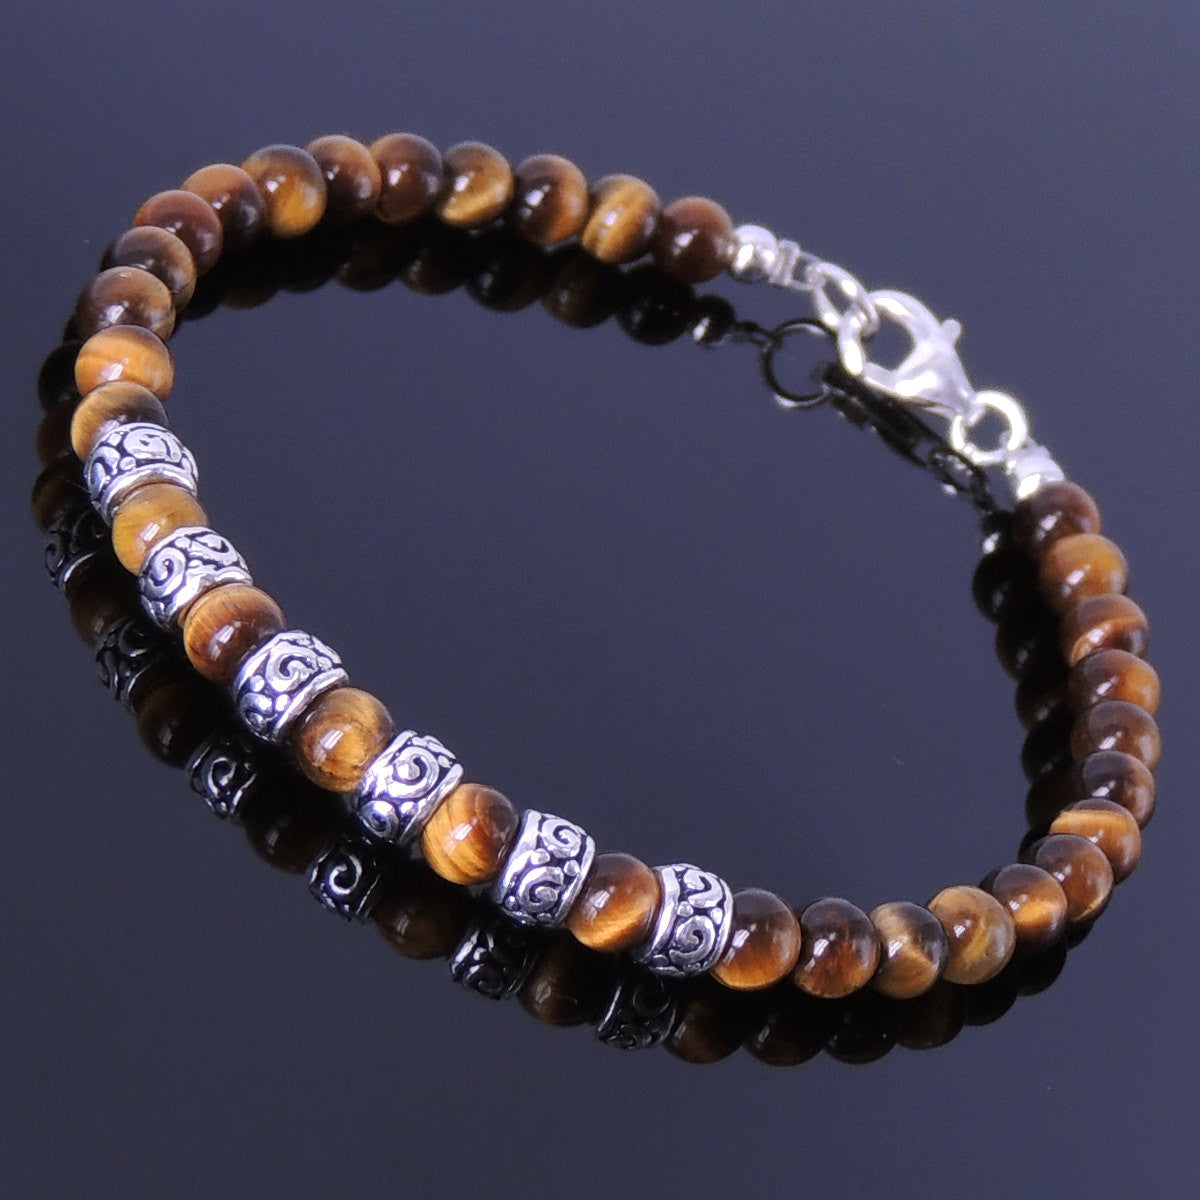 4mm Brown Tiger Eye Healing Gemstone Bracelet with S925 Sterling Silver Artisan Spacer Beads & Clasp - Handmade by Gem & Silver BR183